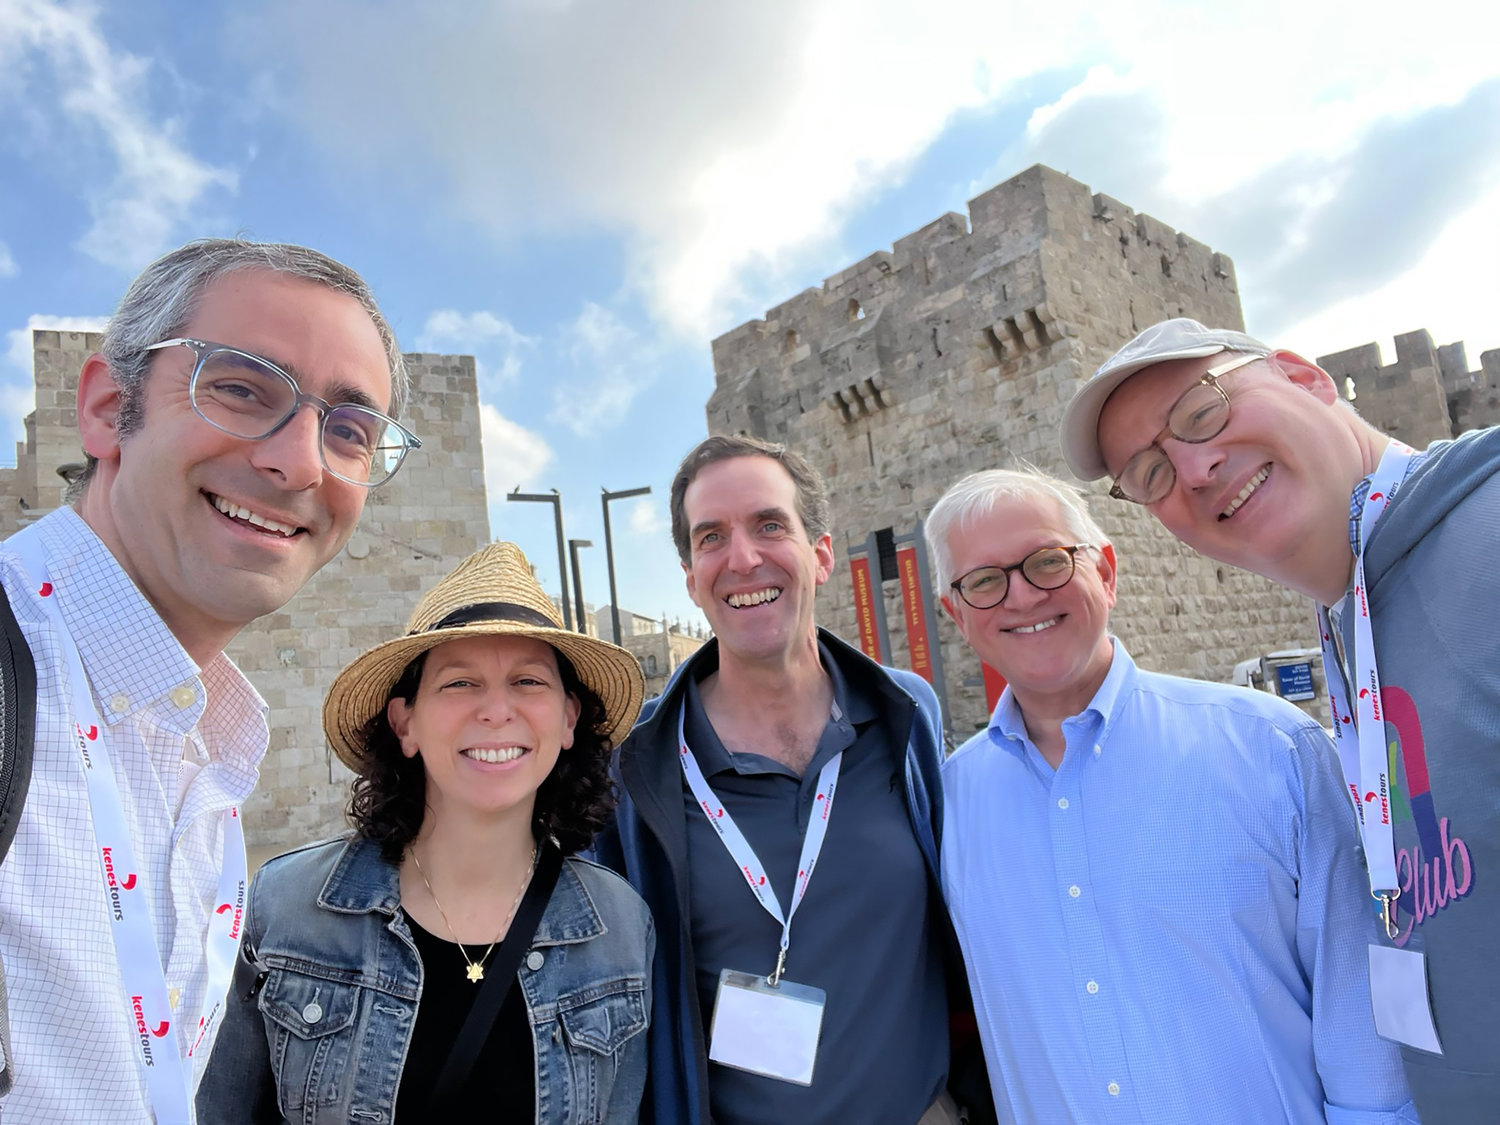 Rabbis who accompanied U.S. Rep. Ritchie Torres visit the Israeli holy land earlier this month. In addition to the rabbis, community members representing organizations such as the Riverdale YMCA were present.